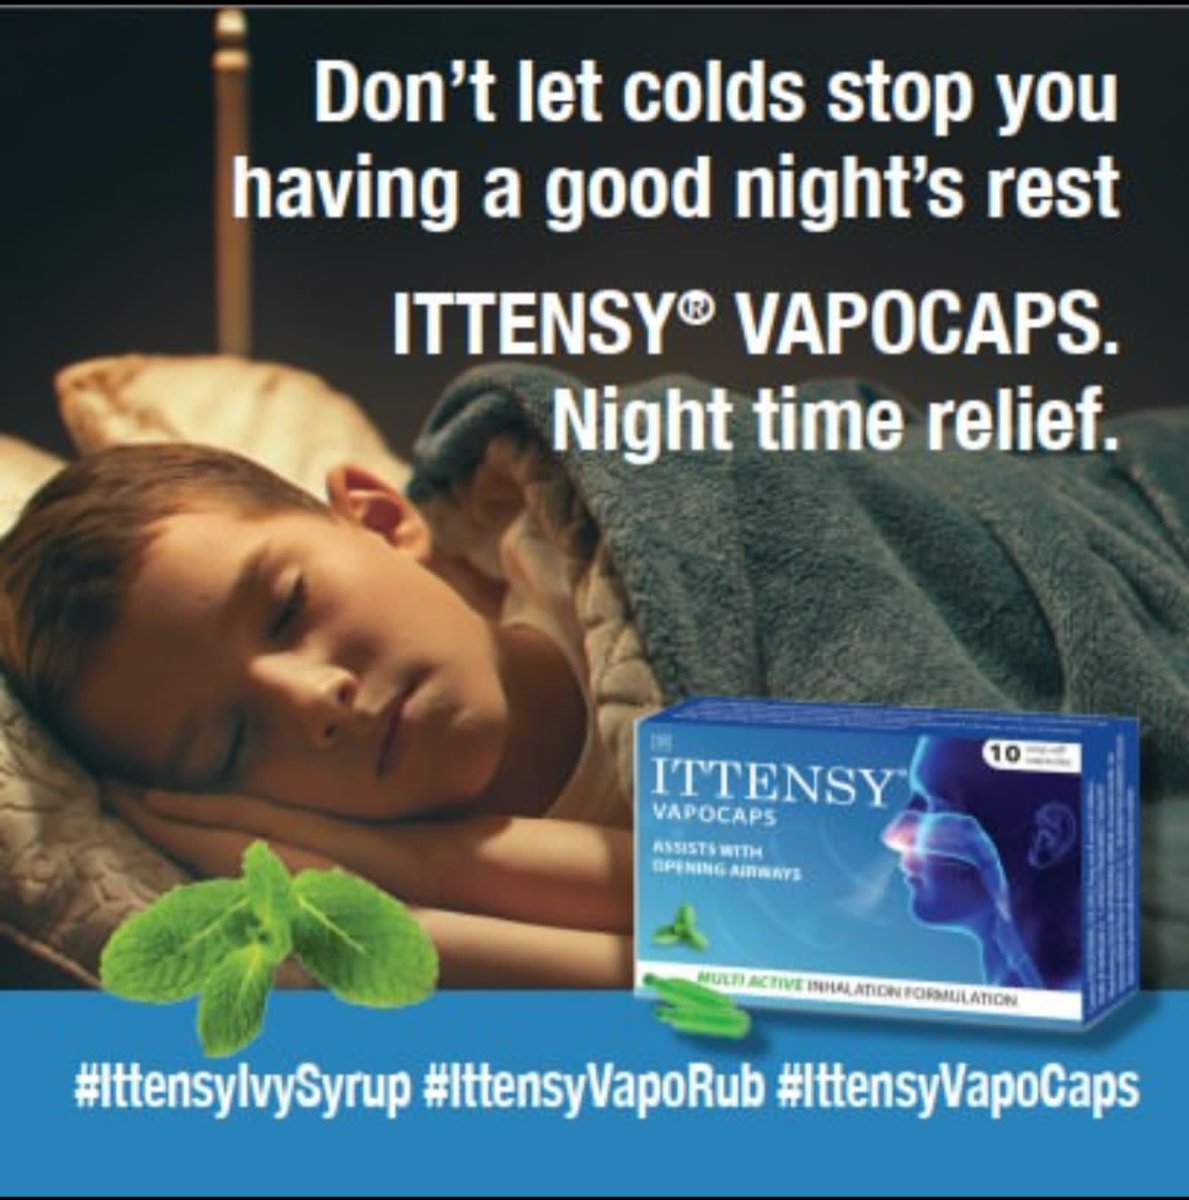 ITTENSY® IVY SYRUP: Naturally clears congestion. #ittensyCare #ittensyWellness